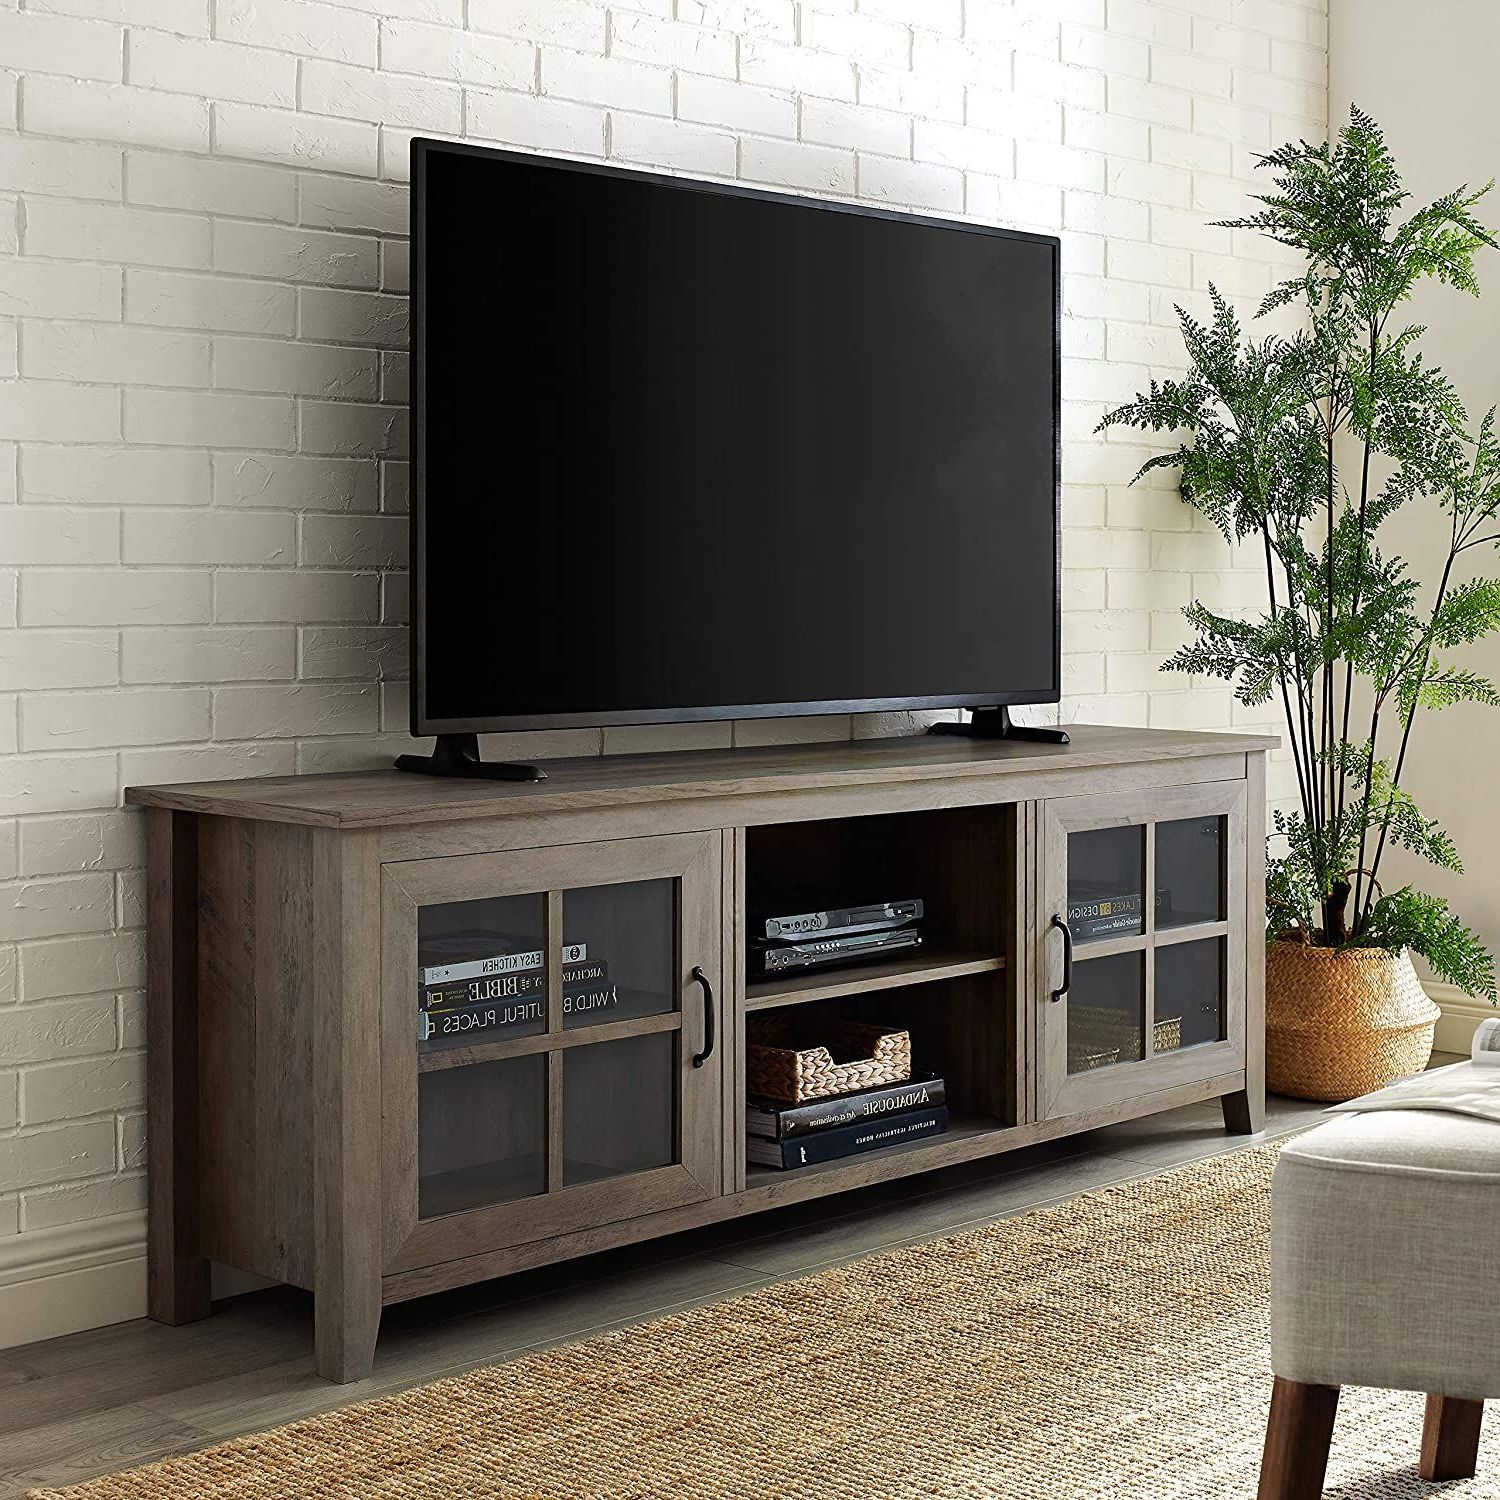 Tv Stand In 2020 | Living Room Storage, Walker Edison Throughout Walker Edison Farmhouse Tv Stands With Storage Cabinet Doors And Shelves (View 4 of 20)